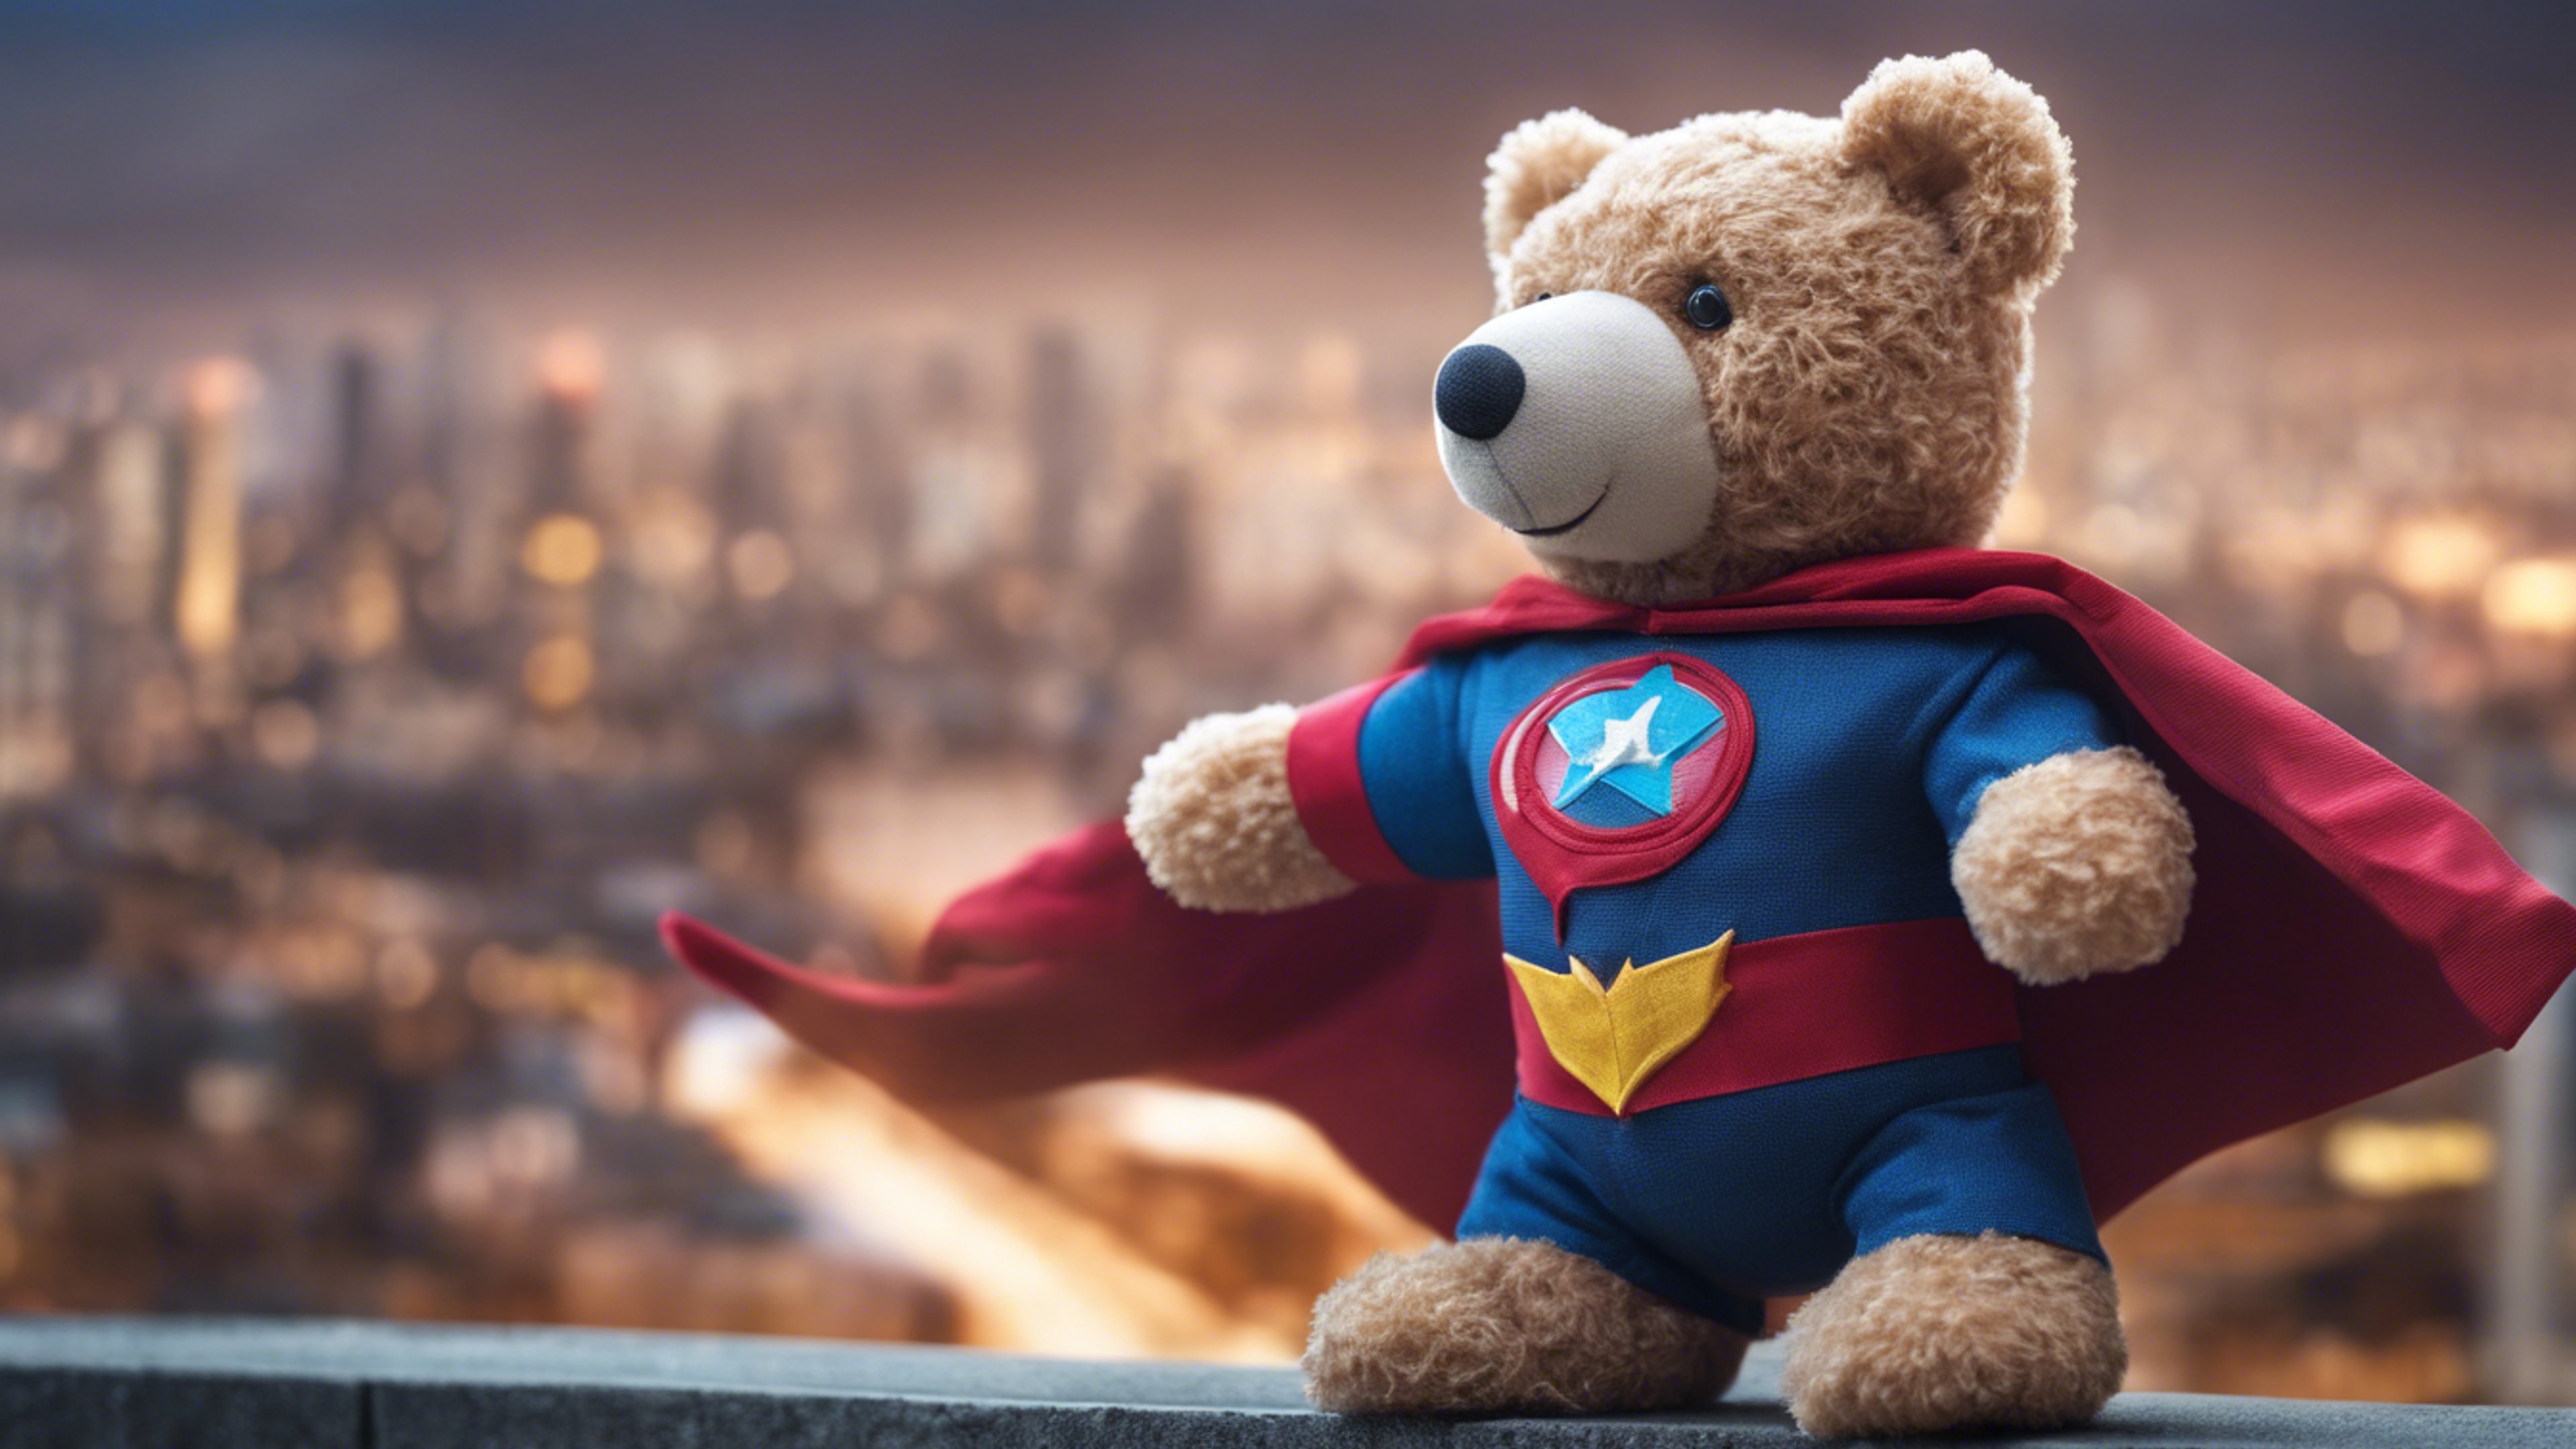 A teddy bear dressed as a superhero, flying against a cityscape backdrop. Tapet[ad961830169c4aee84e3]